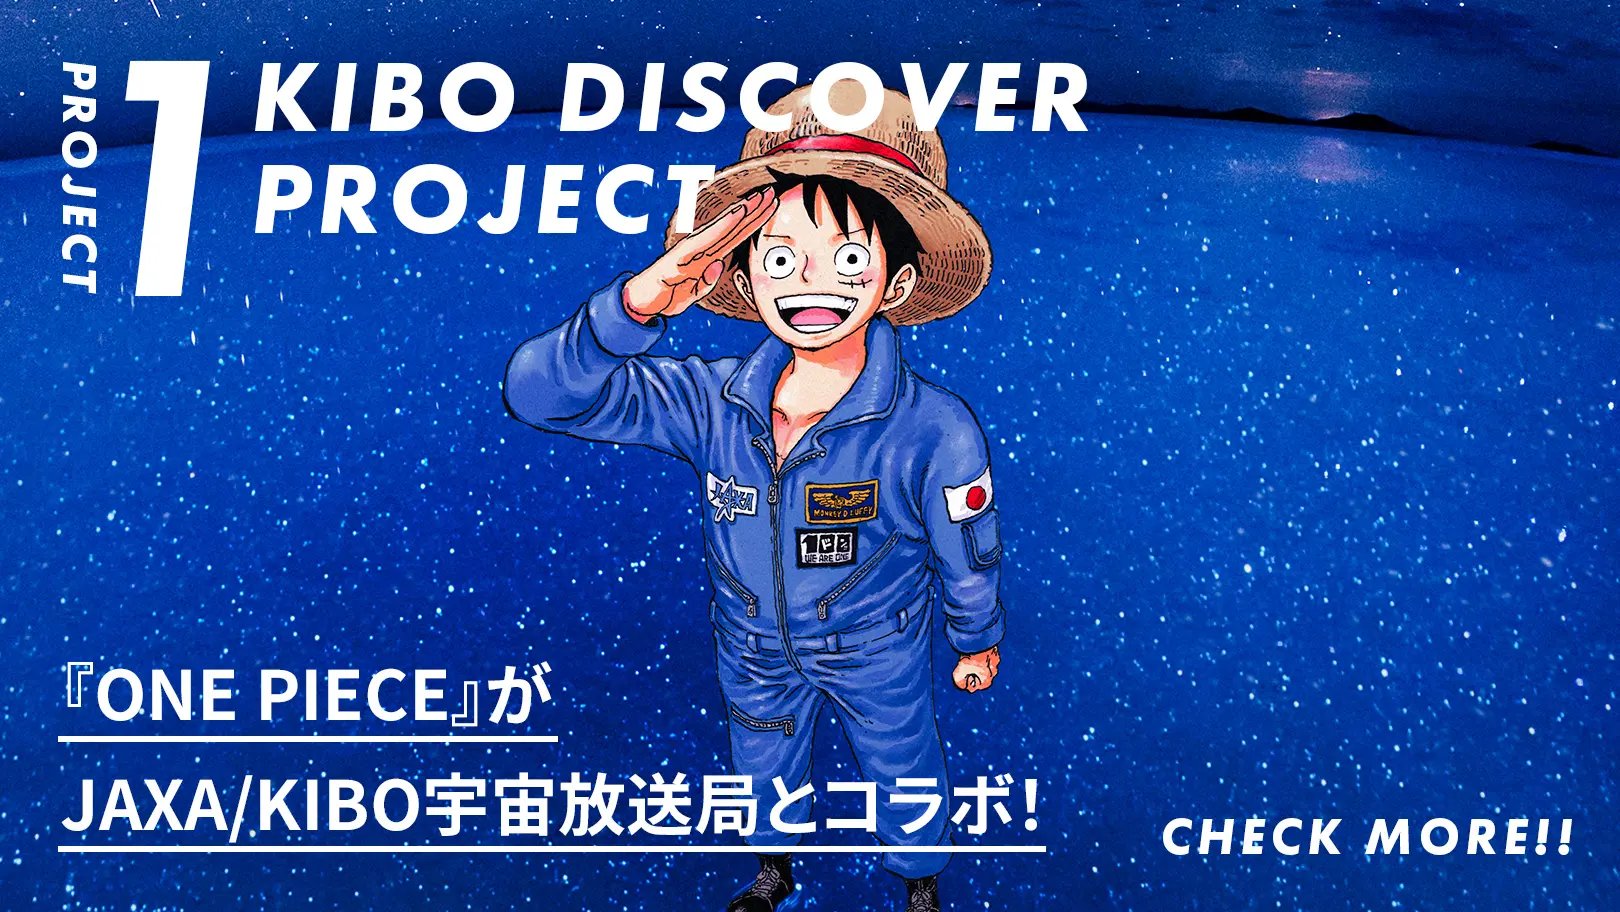 One Piece Project